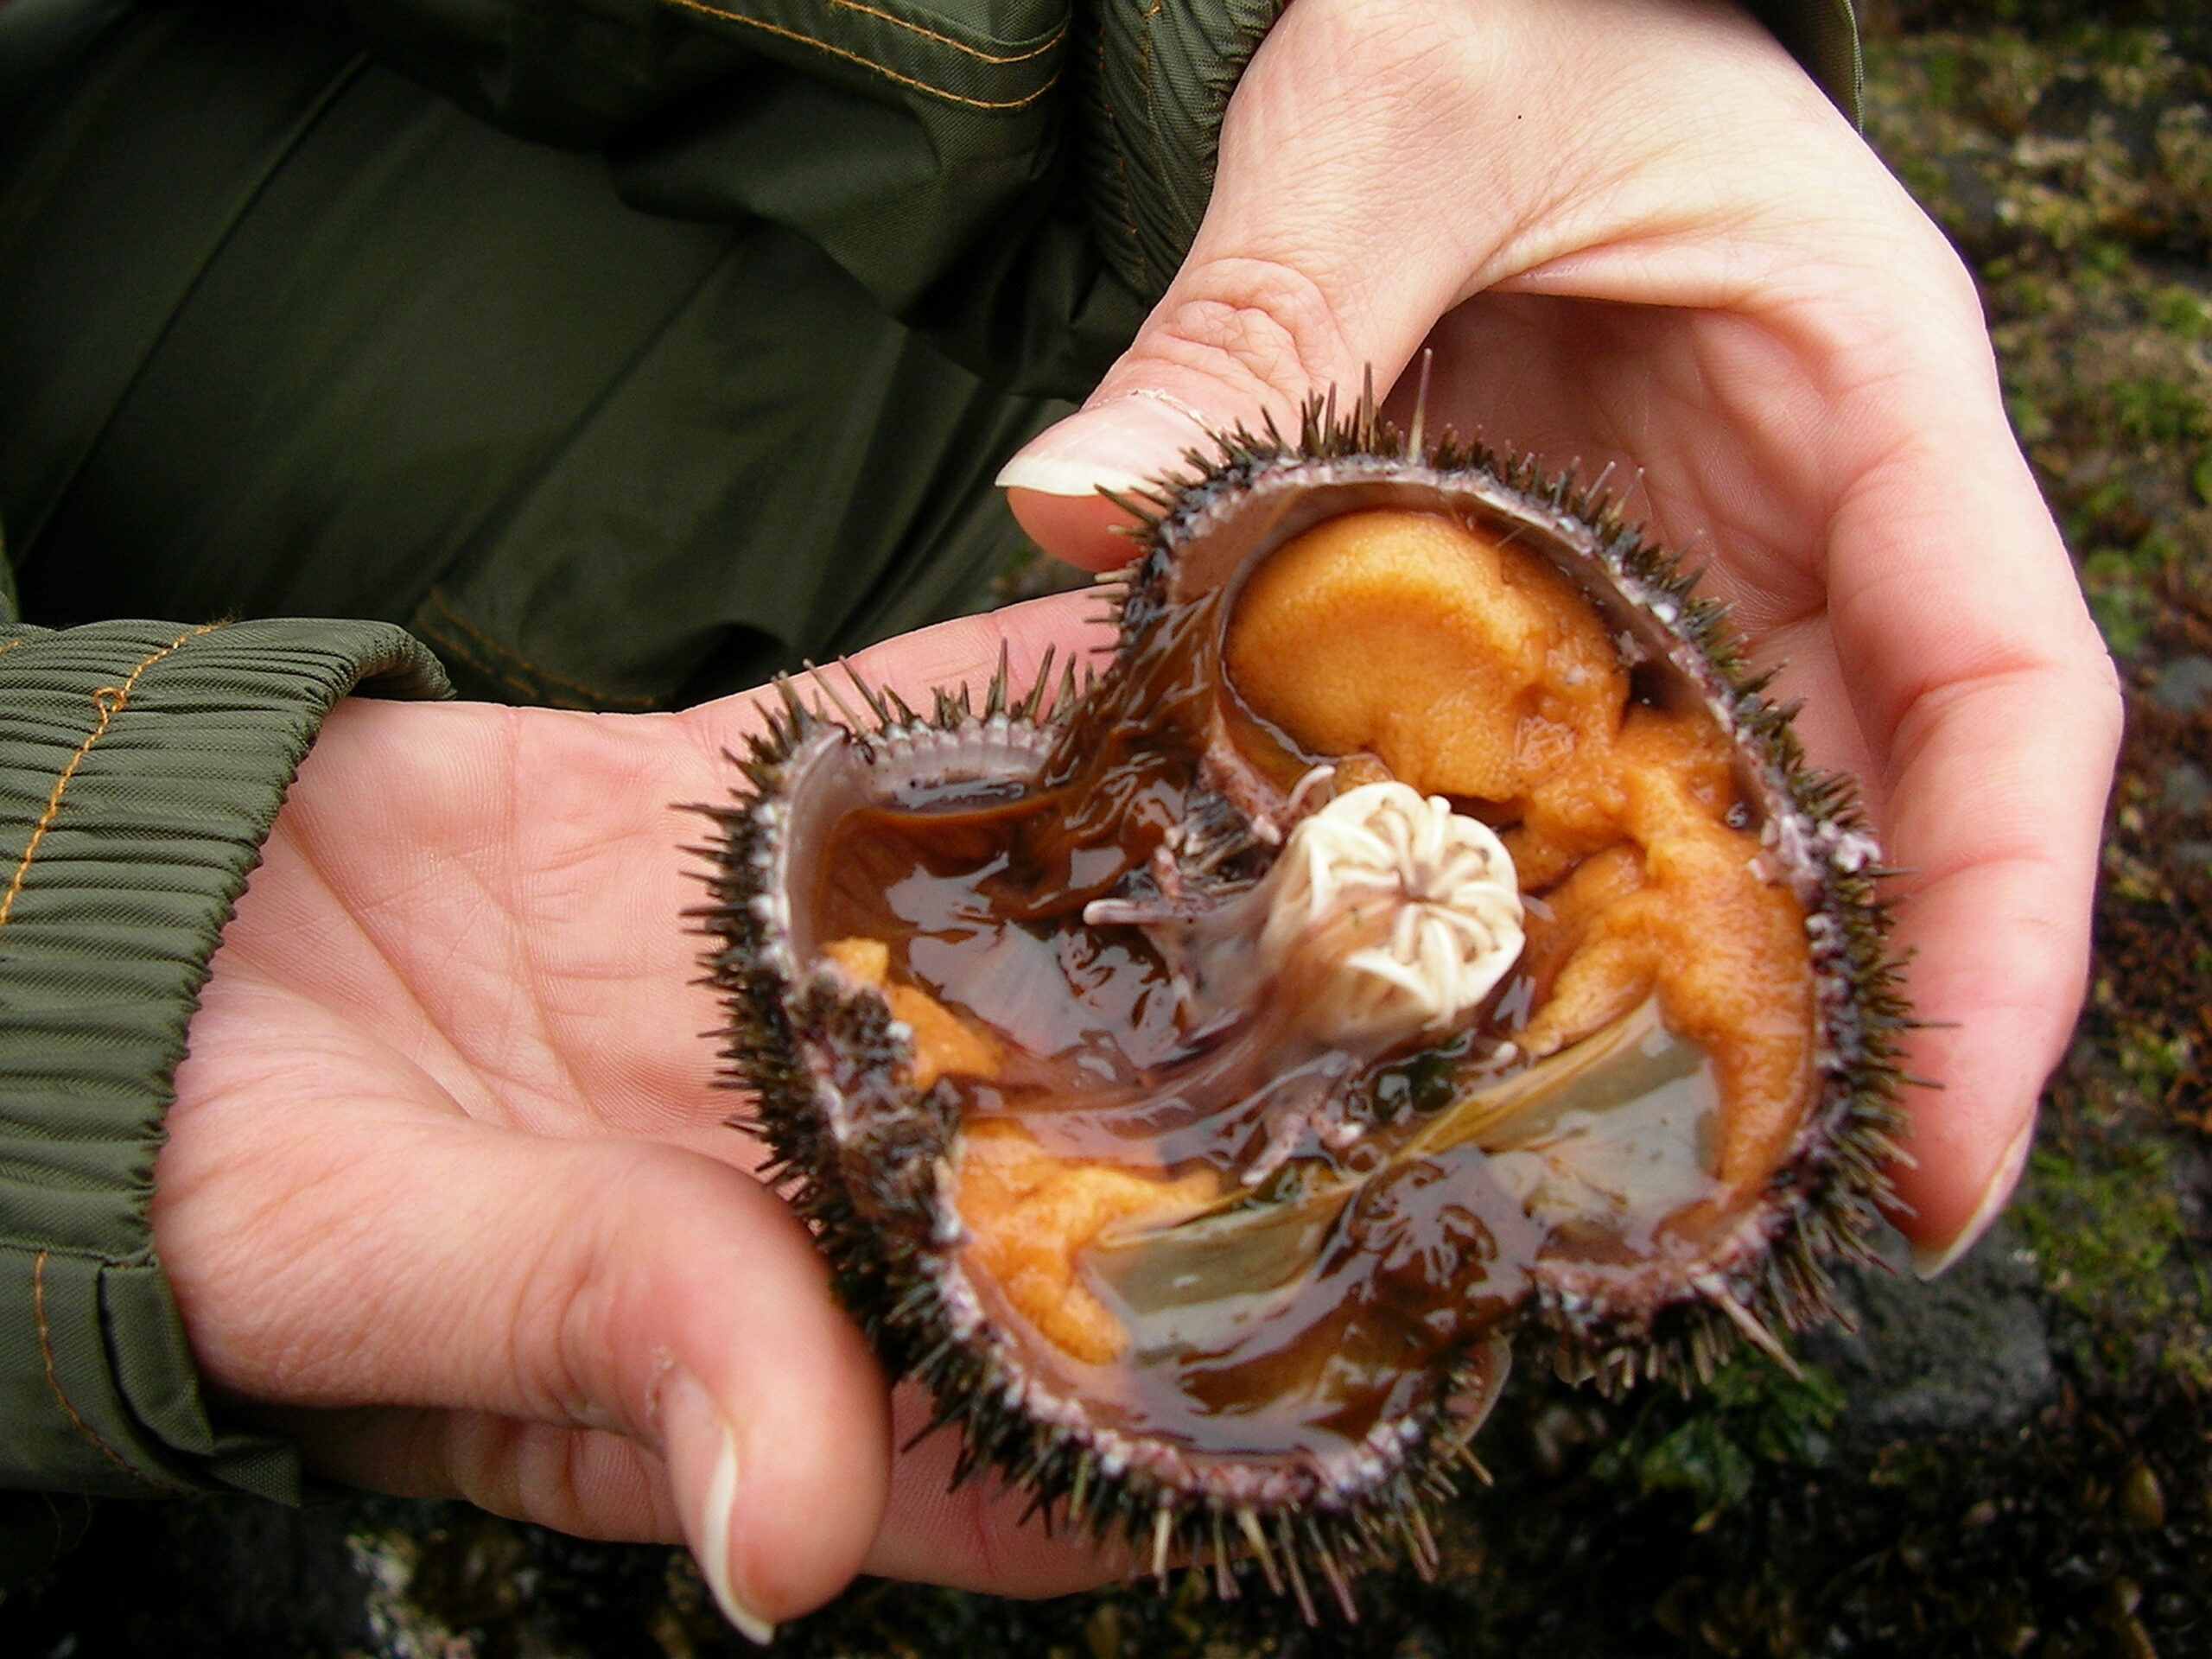 The sea urchin are split carefully so as not to damage the delicate insides. 